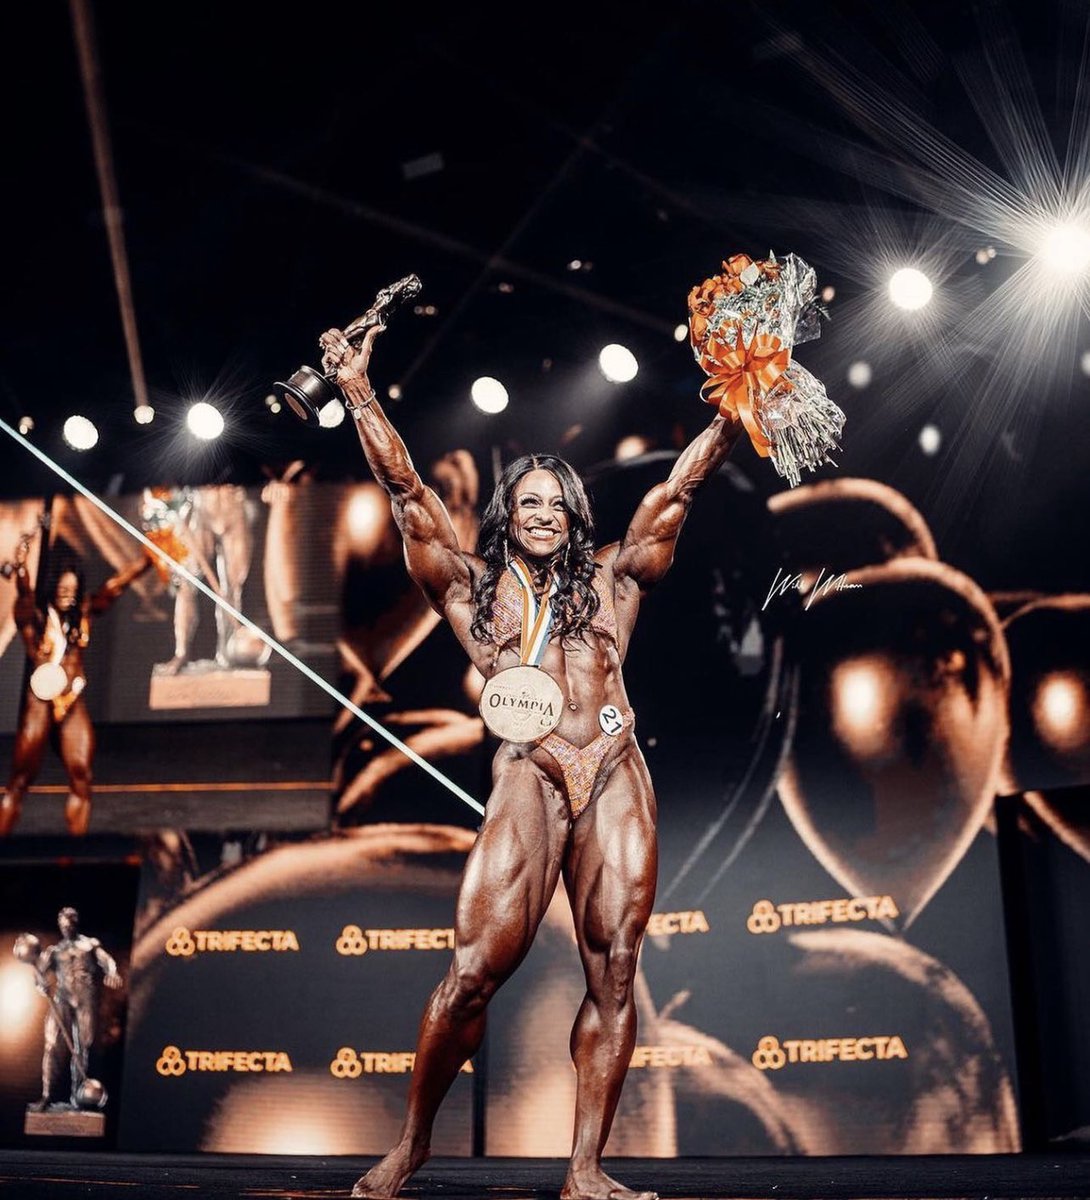 📸 Andrea Shaw #BlackImmortals Caption: Ms Olympia 2022 #AndreaShaw #msOlympia #IFBB #bodybuilding #FIFAWorldCup #fit #ArgentinaVsFrance #gymgirl #shredded #AUSvsSA #MissFrance